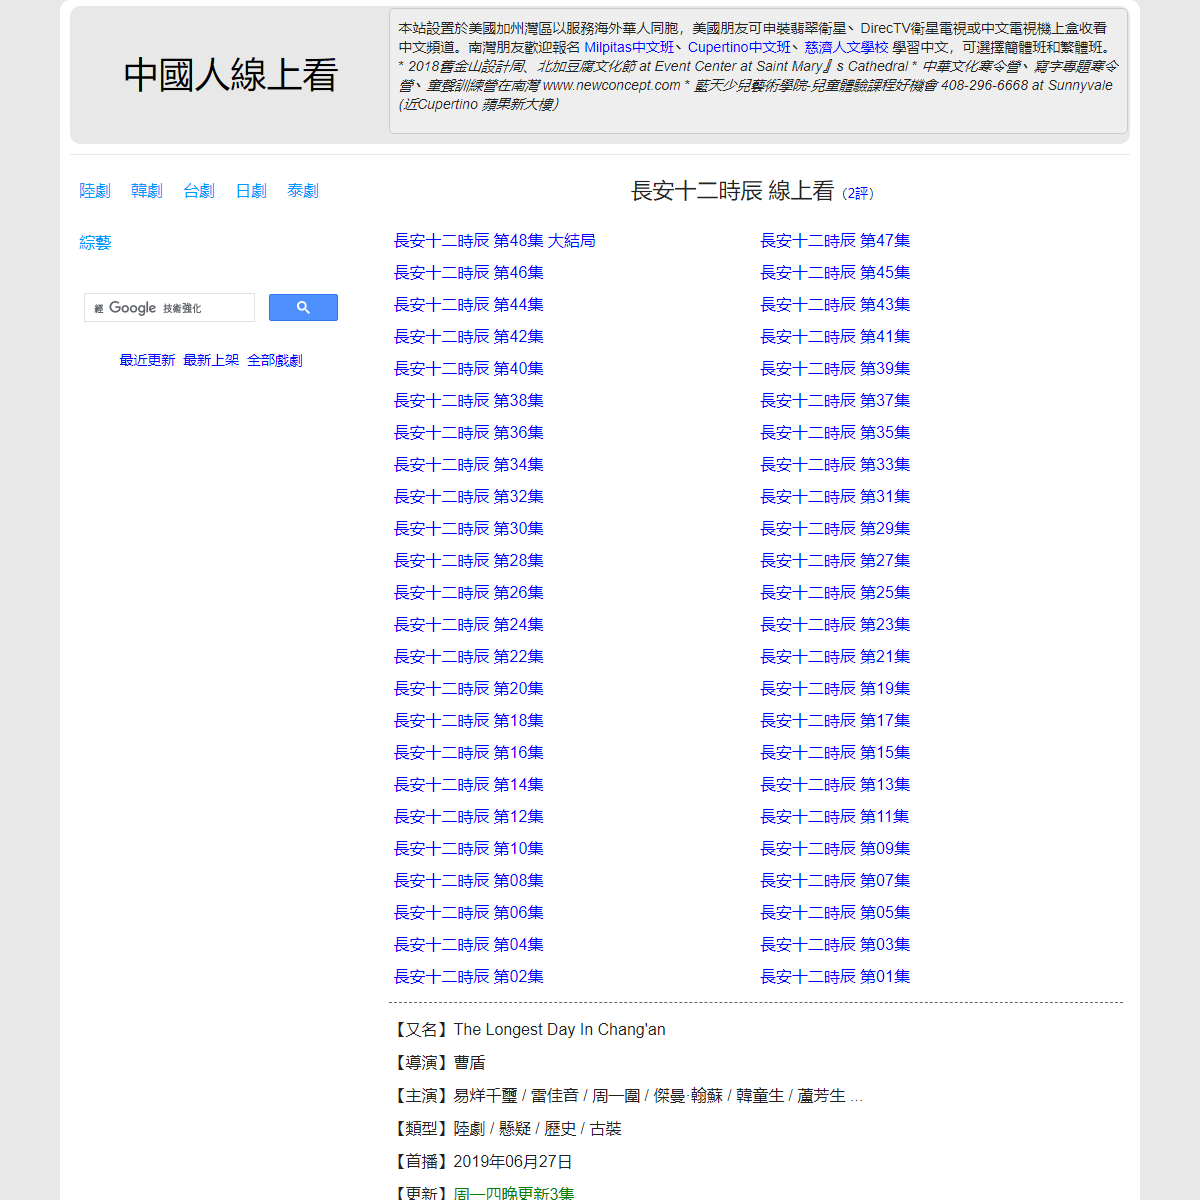 A complete backup of https://chinaq.tv/cn190627b/